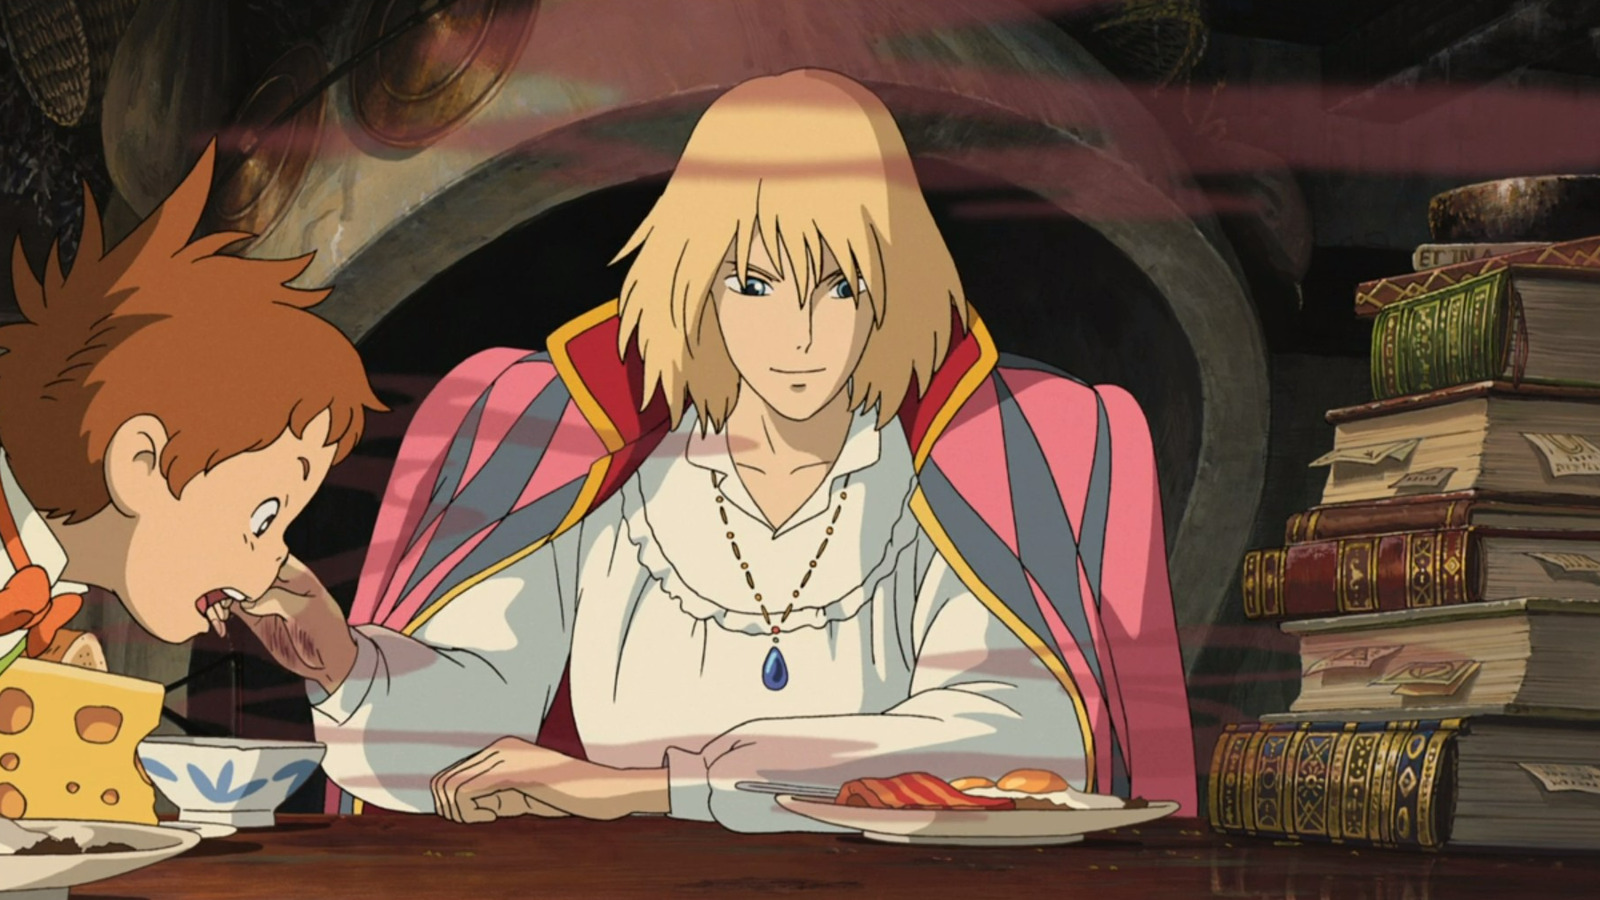 Howl's Moving Castle: How Closely Does Studio Ghibli's Film Follow The Book?